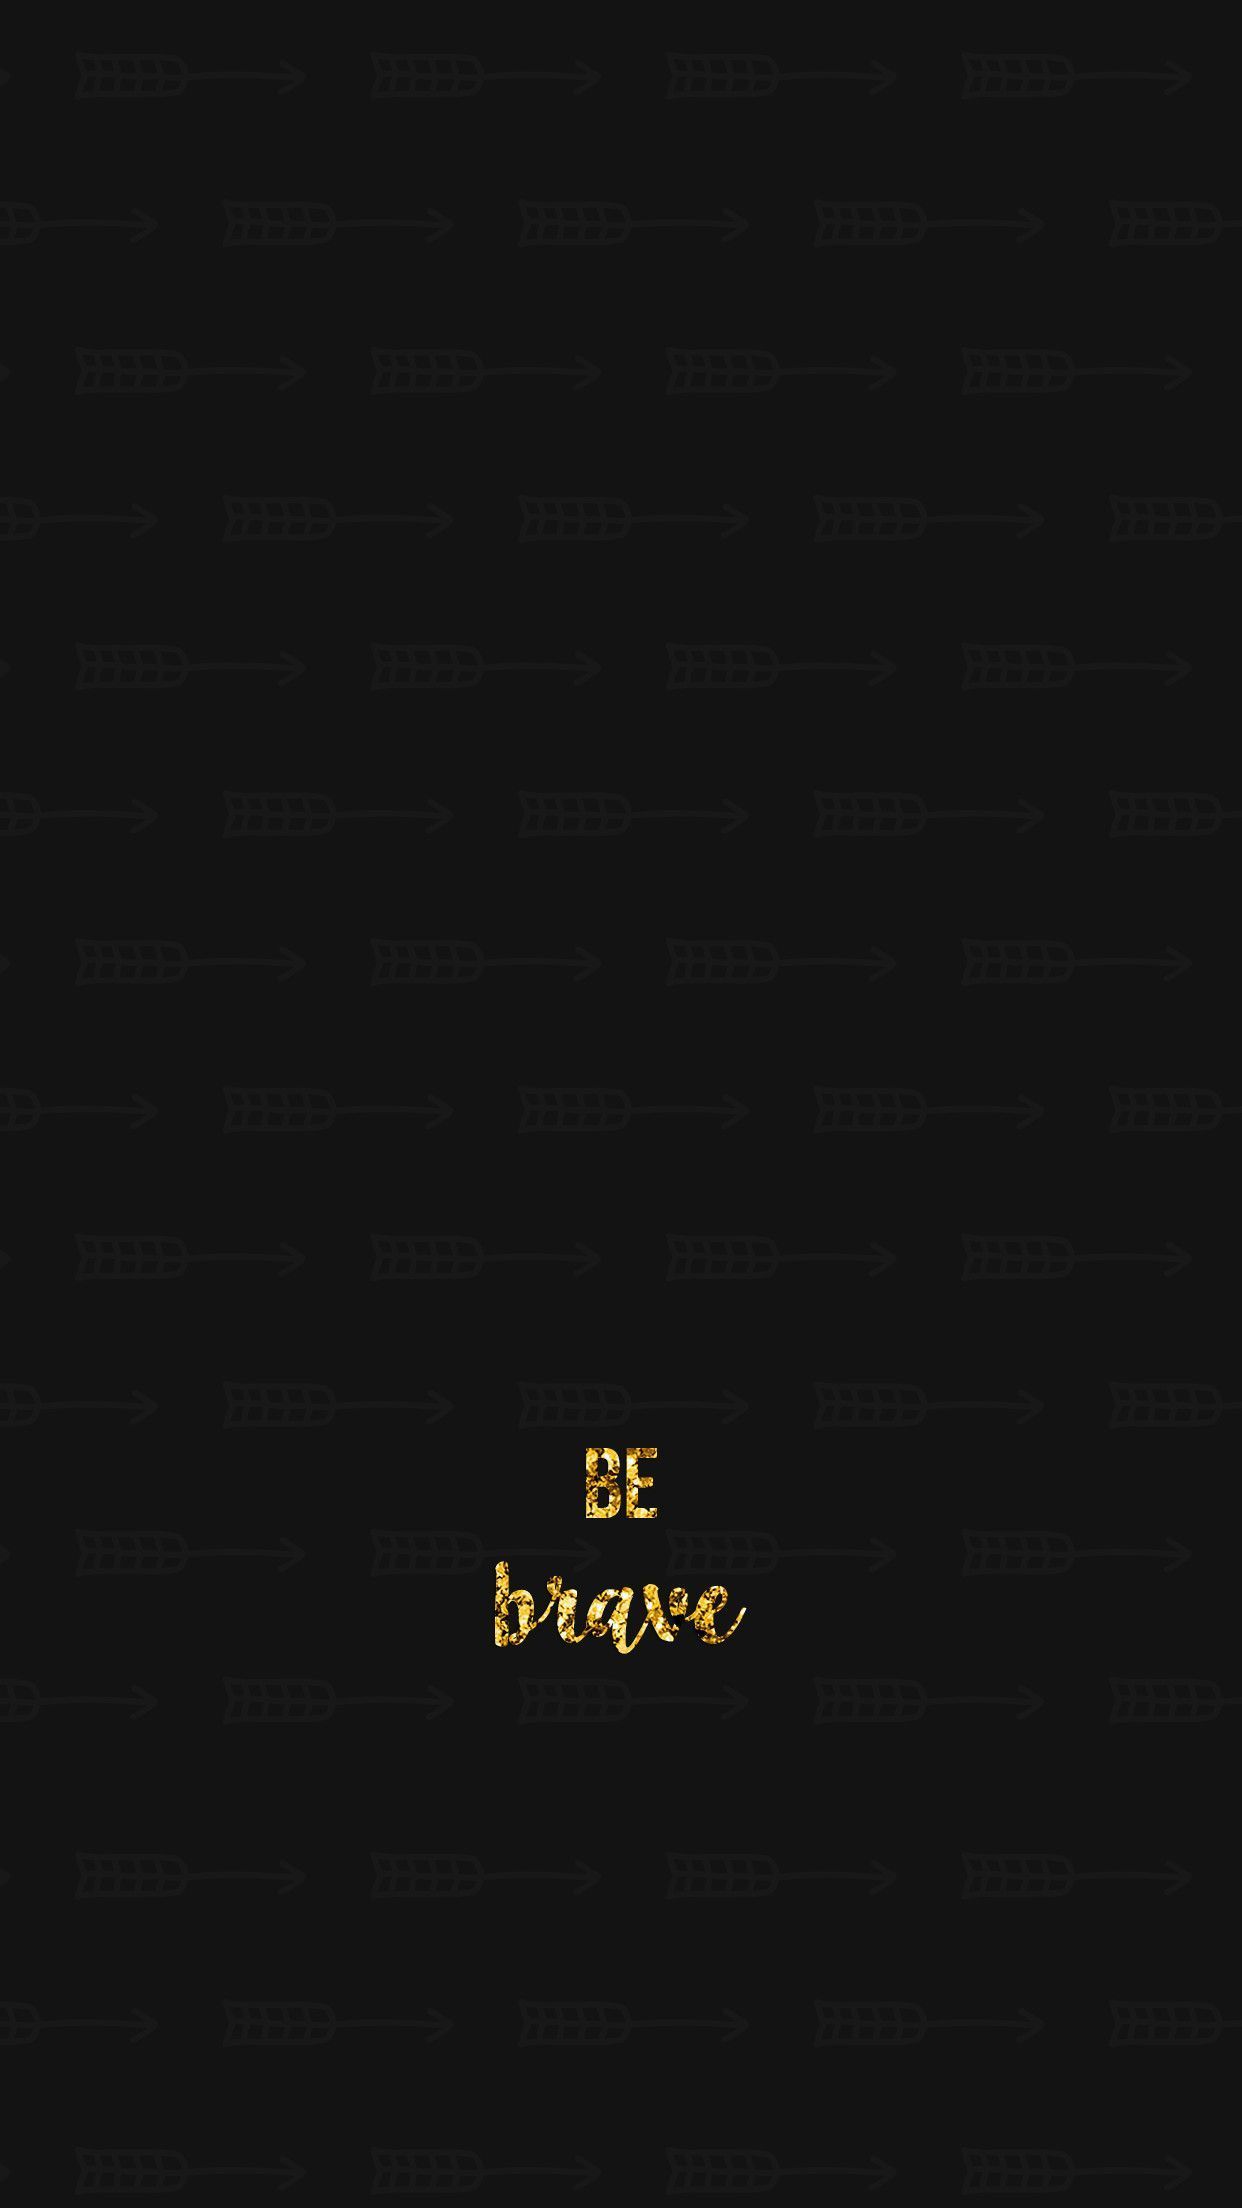 Black and Gold iPhone Wallpaper